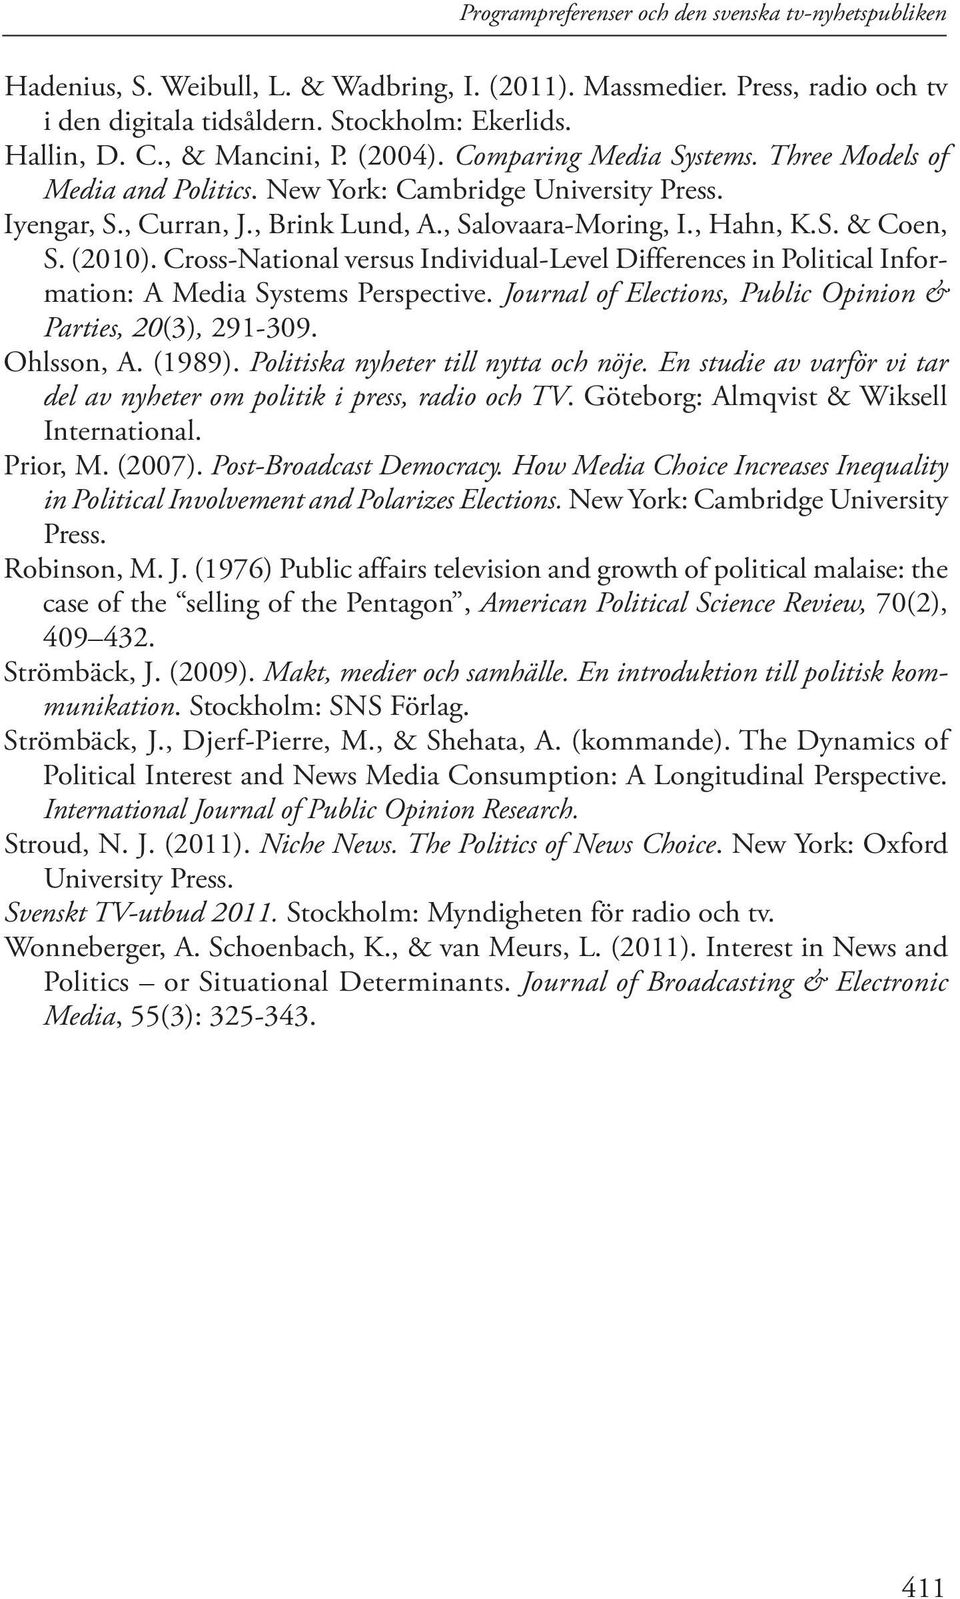 (2010). Cross-National versus Individual-Level Differences in Political Information: A Media Systems Perspective. Journal of Elections, Public Opinion & Parties, 20(3), 291-309. Ohlsson, A. (1989).